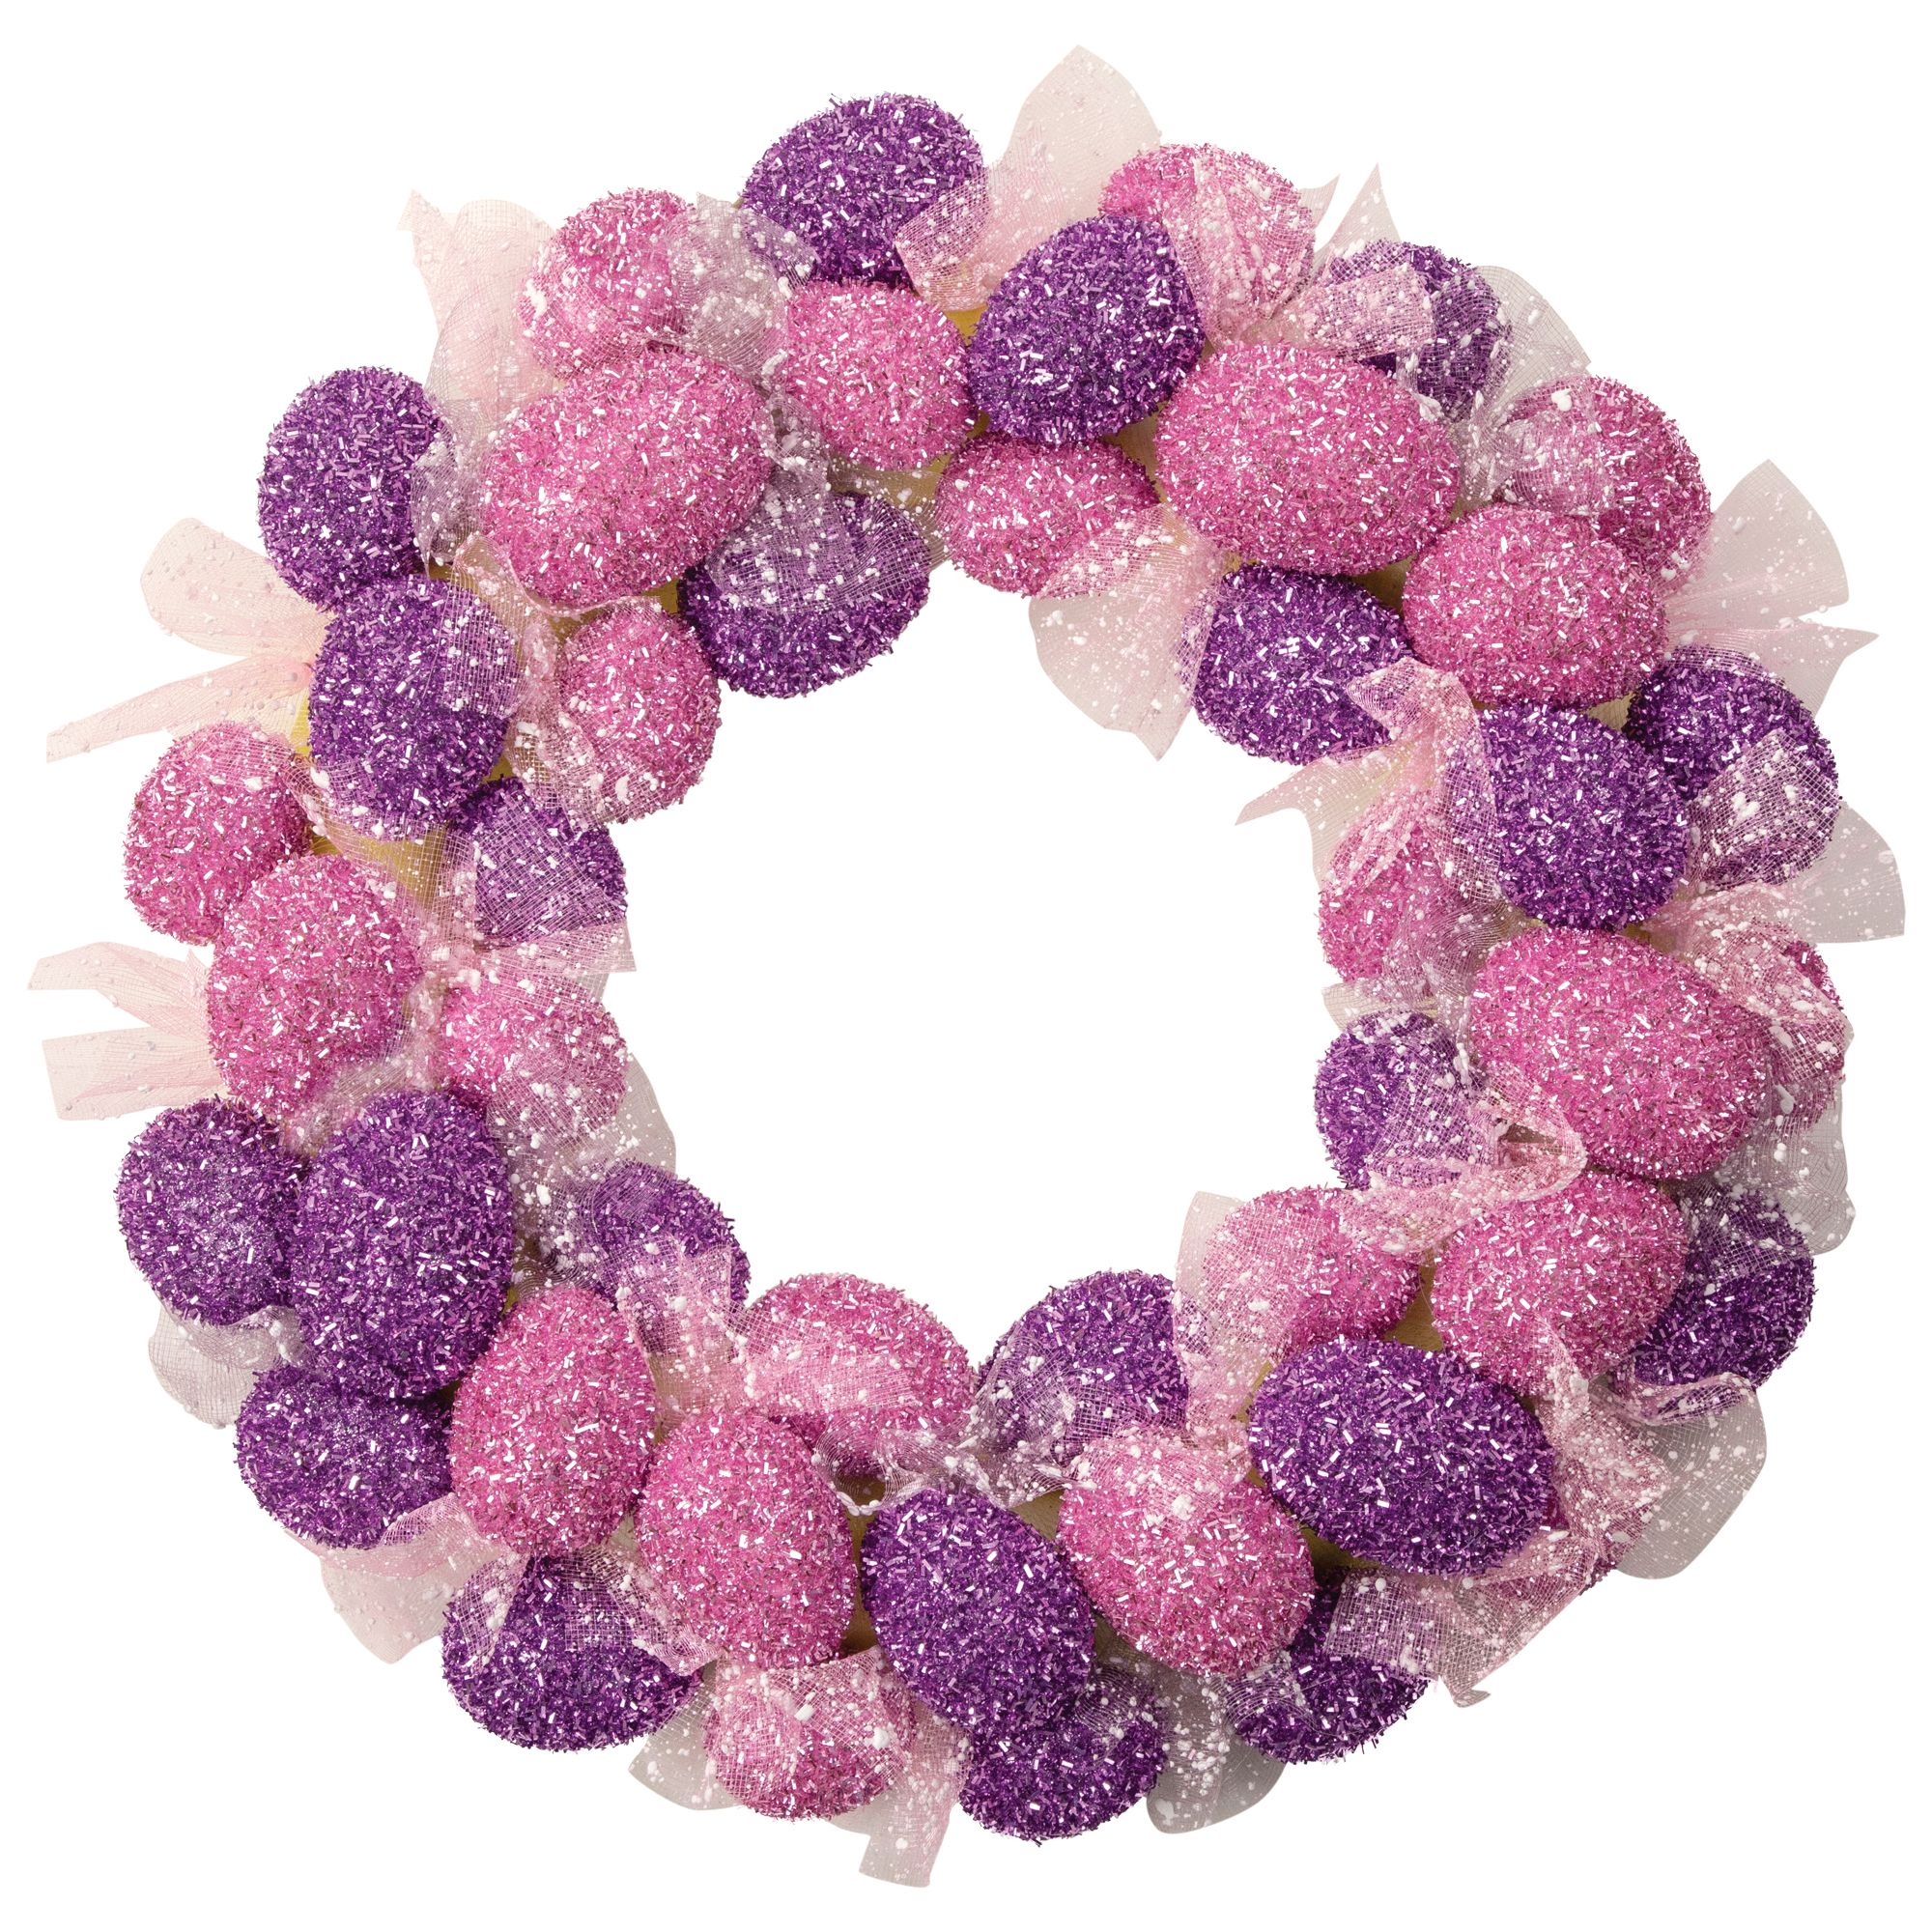 Northlight 20&quot; Glittered Pink and Purple Easter Egg Wreath